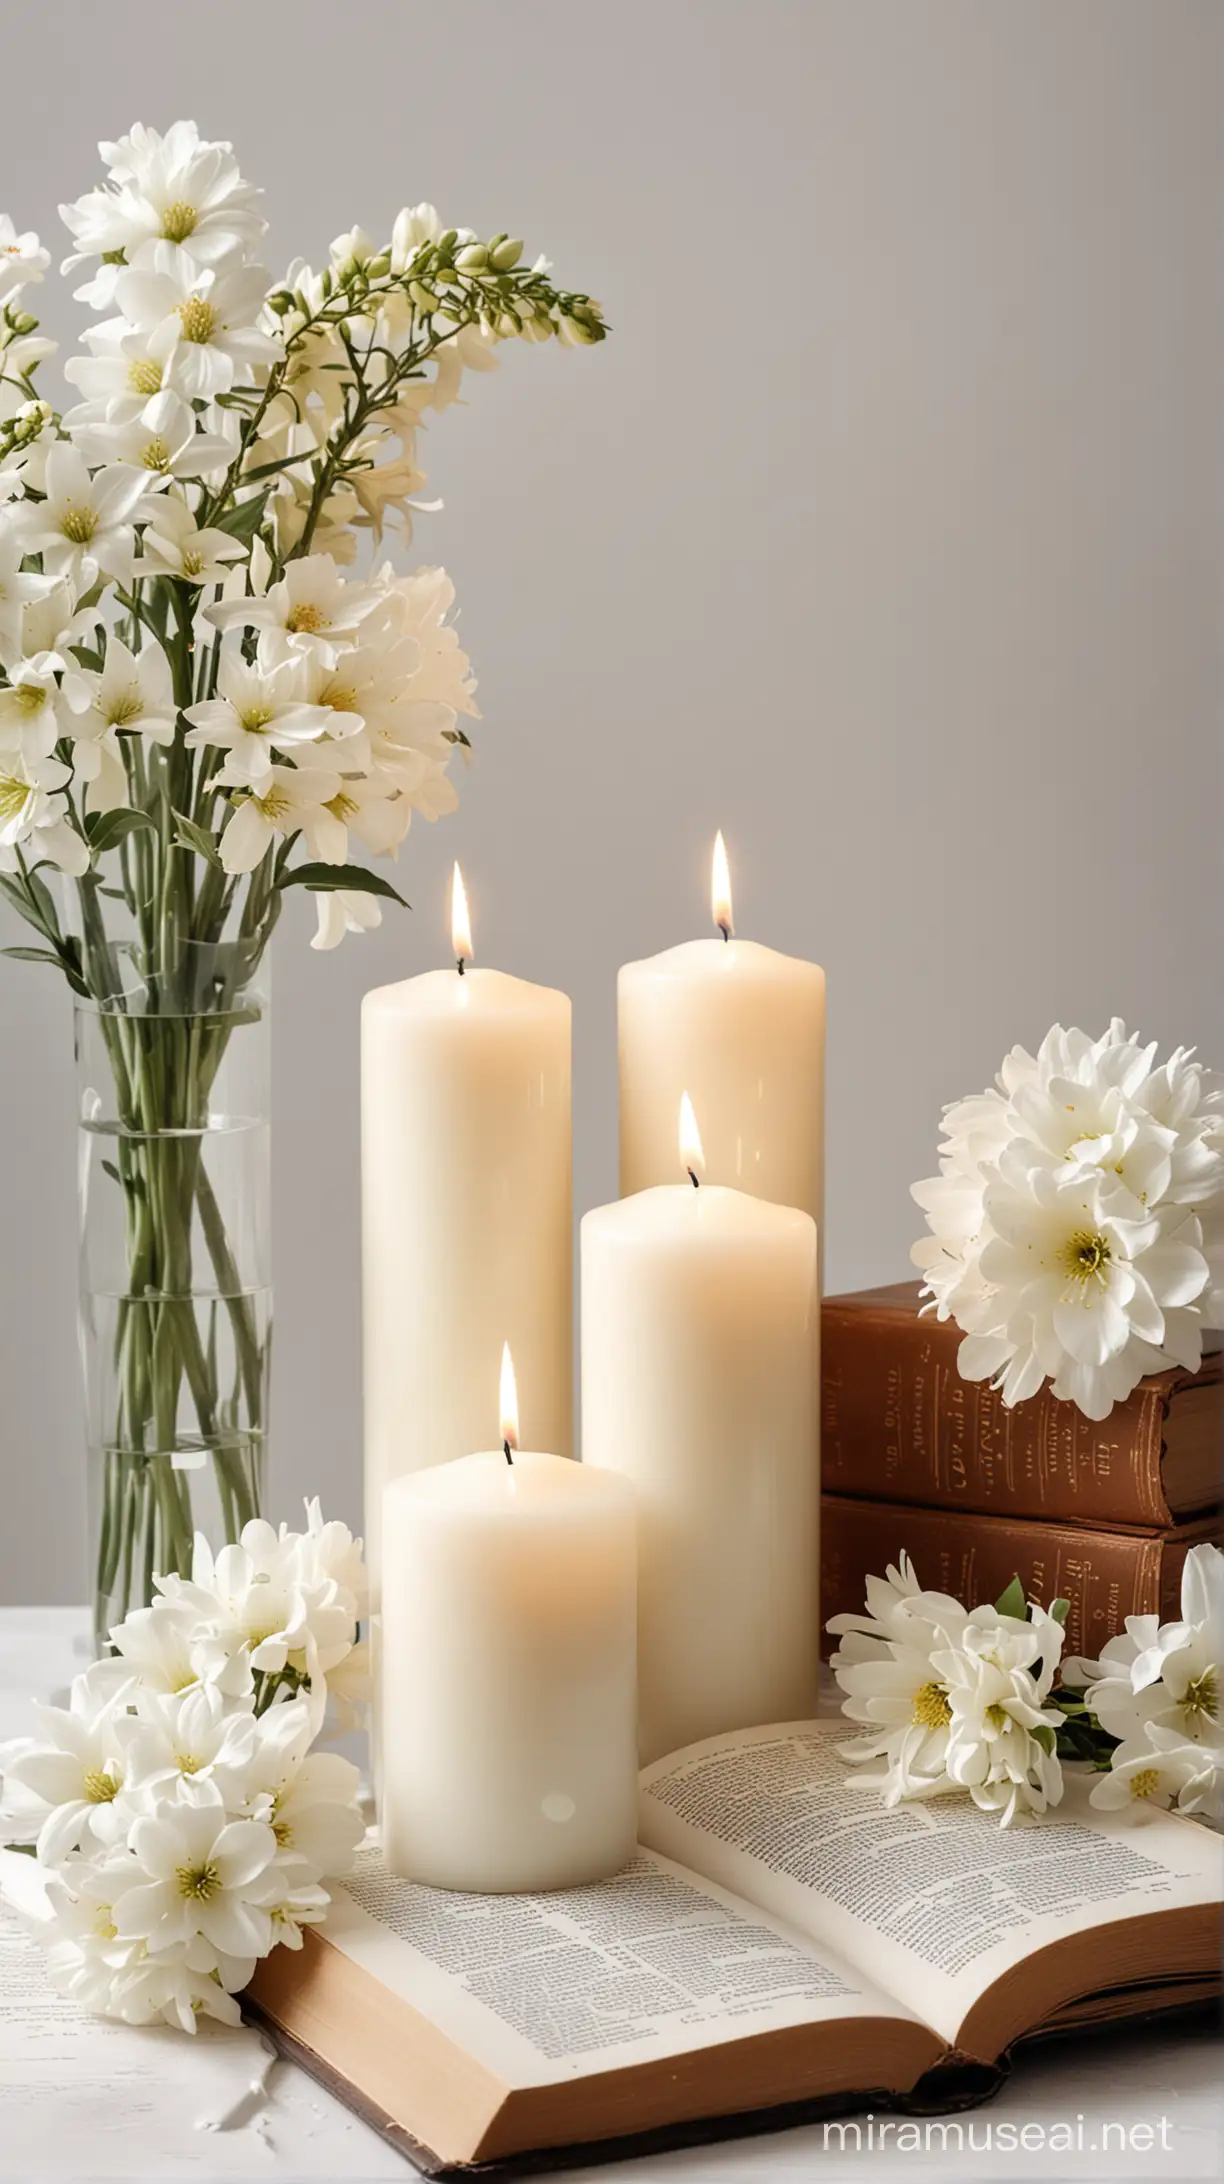 Elegant Candle Arrangement with White Flowers and Open Bible on White Surface with Soft Glow